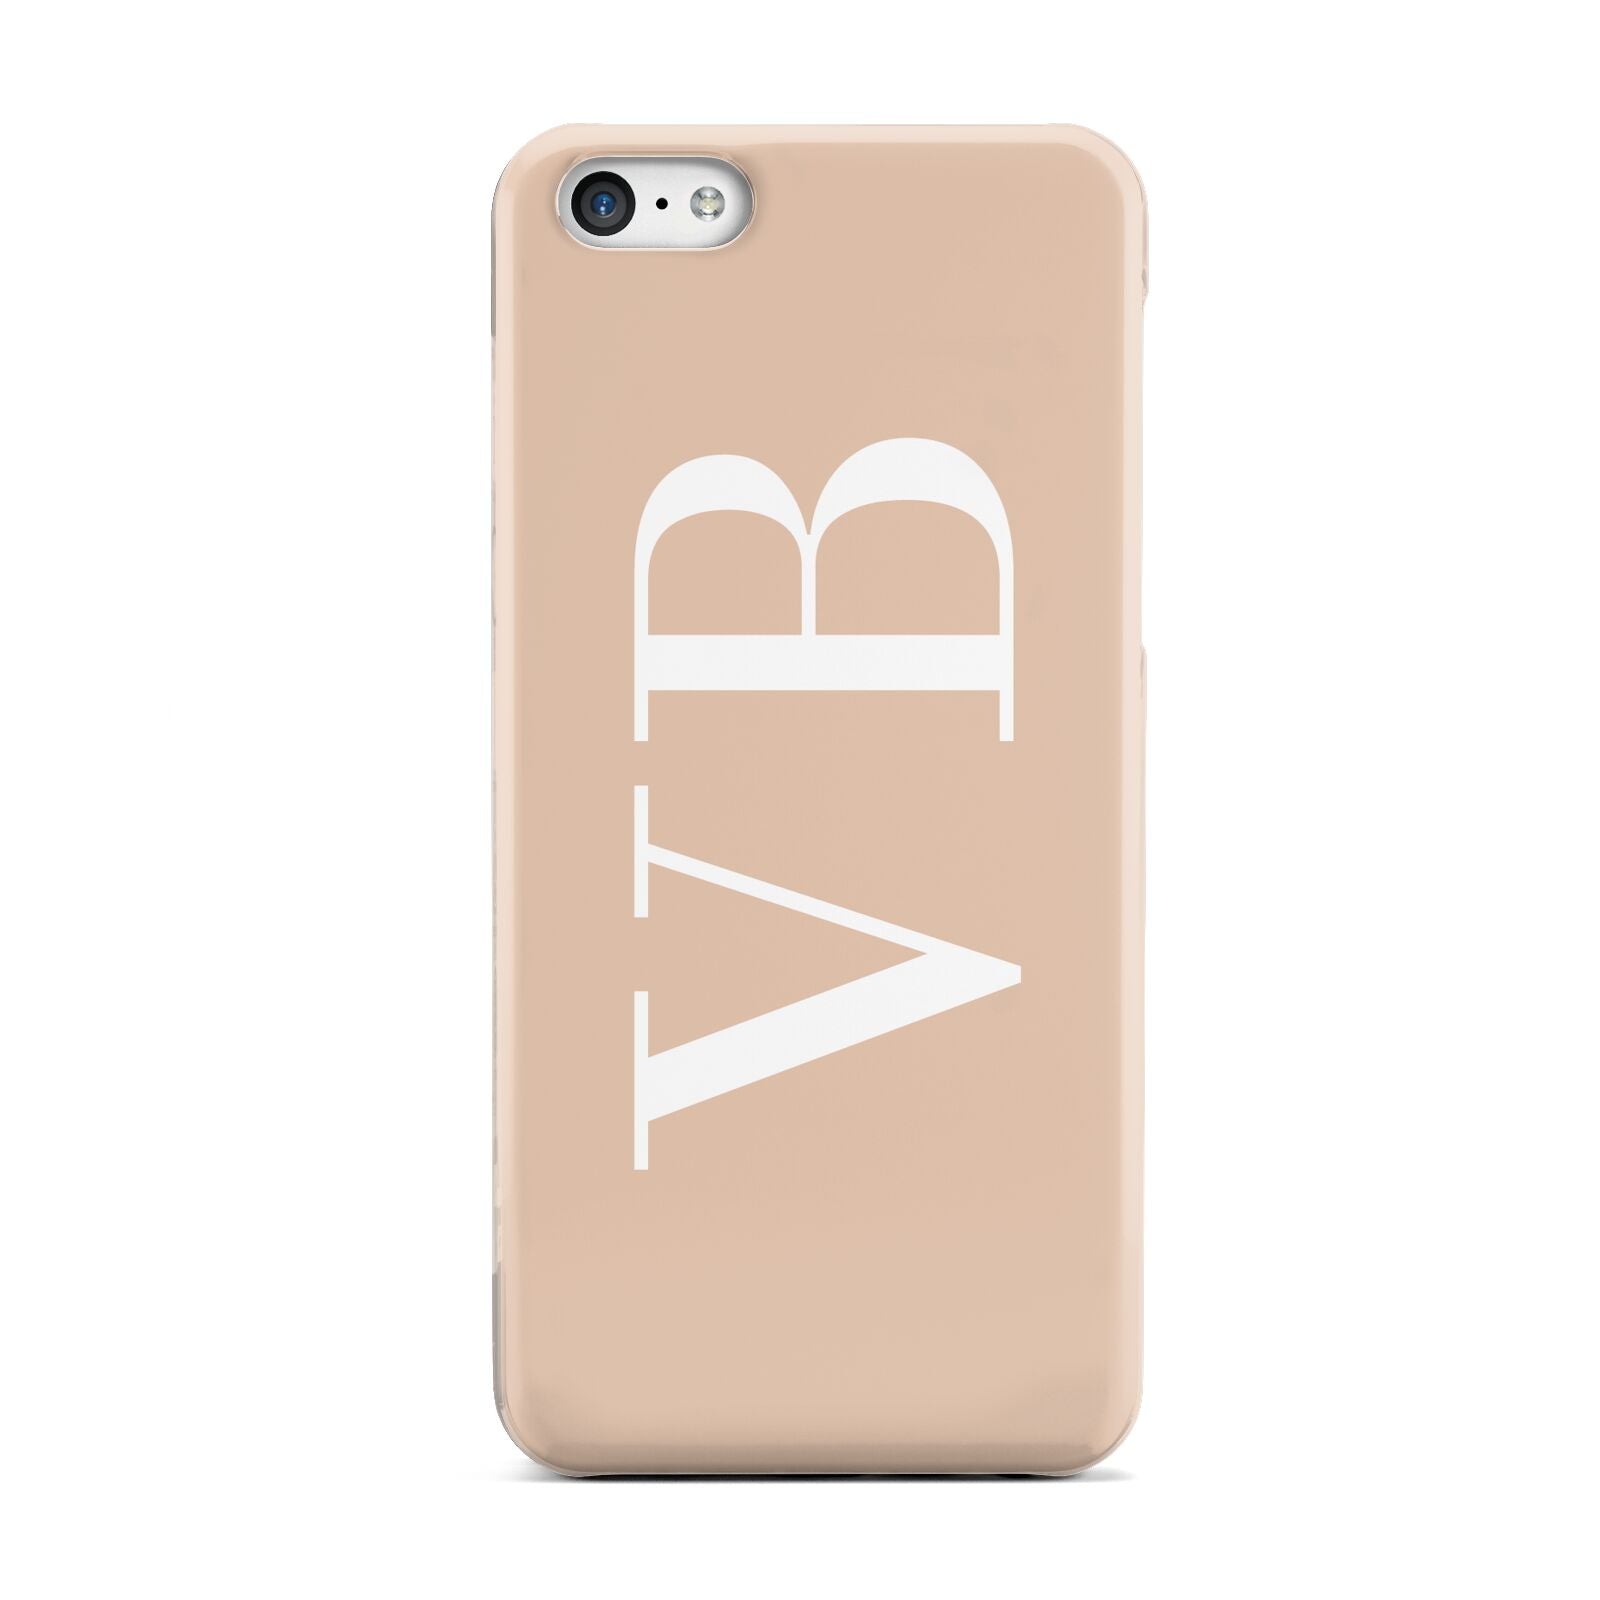 Nude And White Personalised Apple iPhone 5c Case